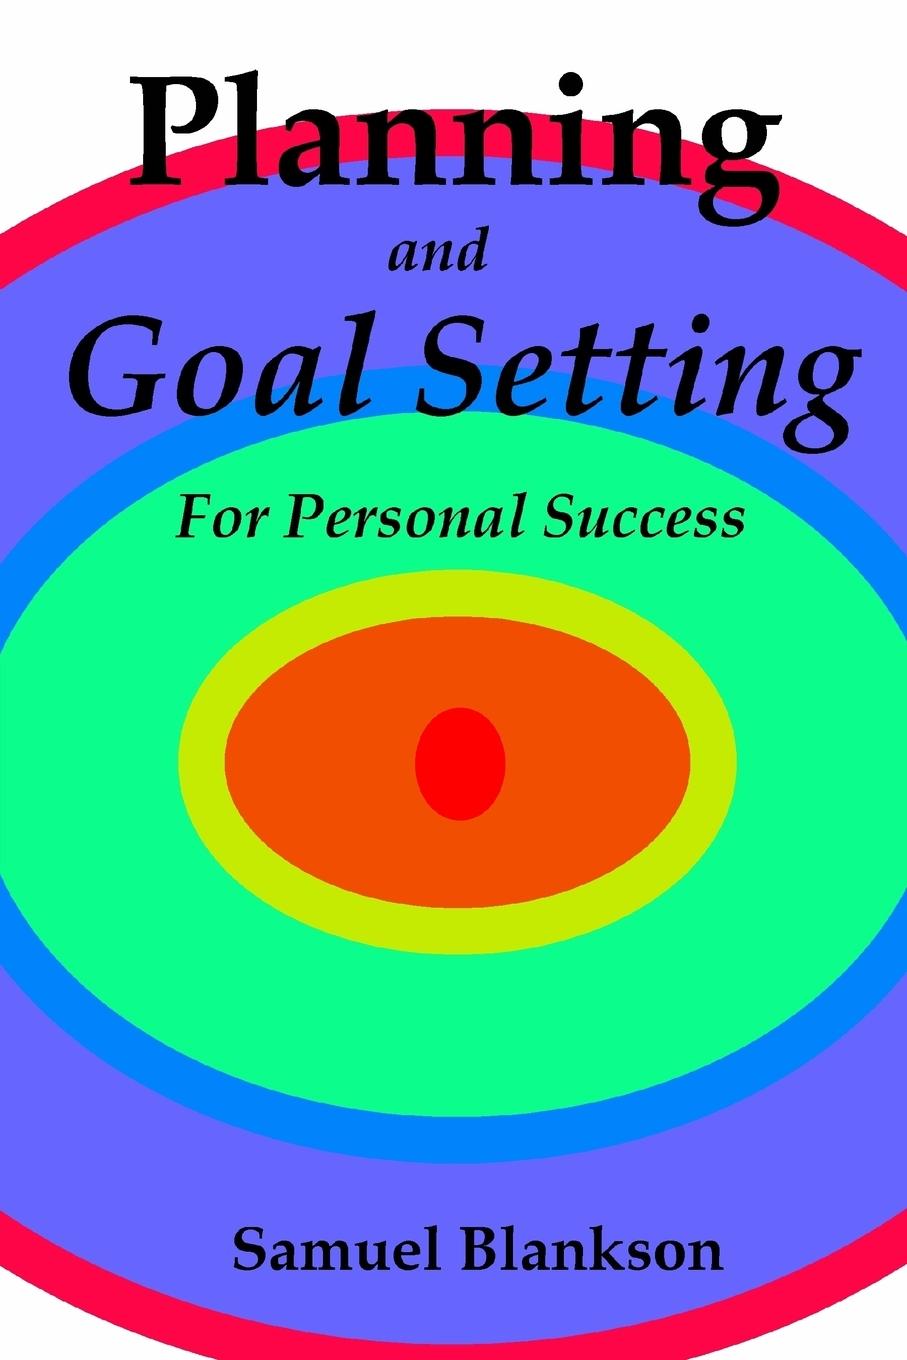 Planning And Goal Setting For Personal Success  Samuel Blankson  Taschenbuch  2:B&W 6 x 9 in or 229 x 152 mm Perfect Bound on Creme w/Gloss Lam  Englisch  2008 - Blankson, Samuel